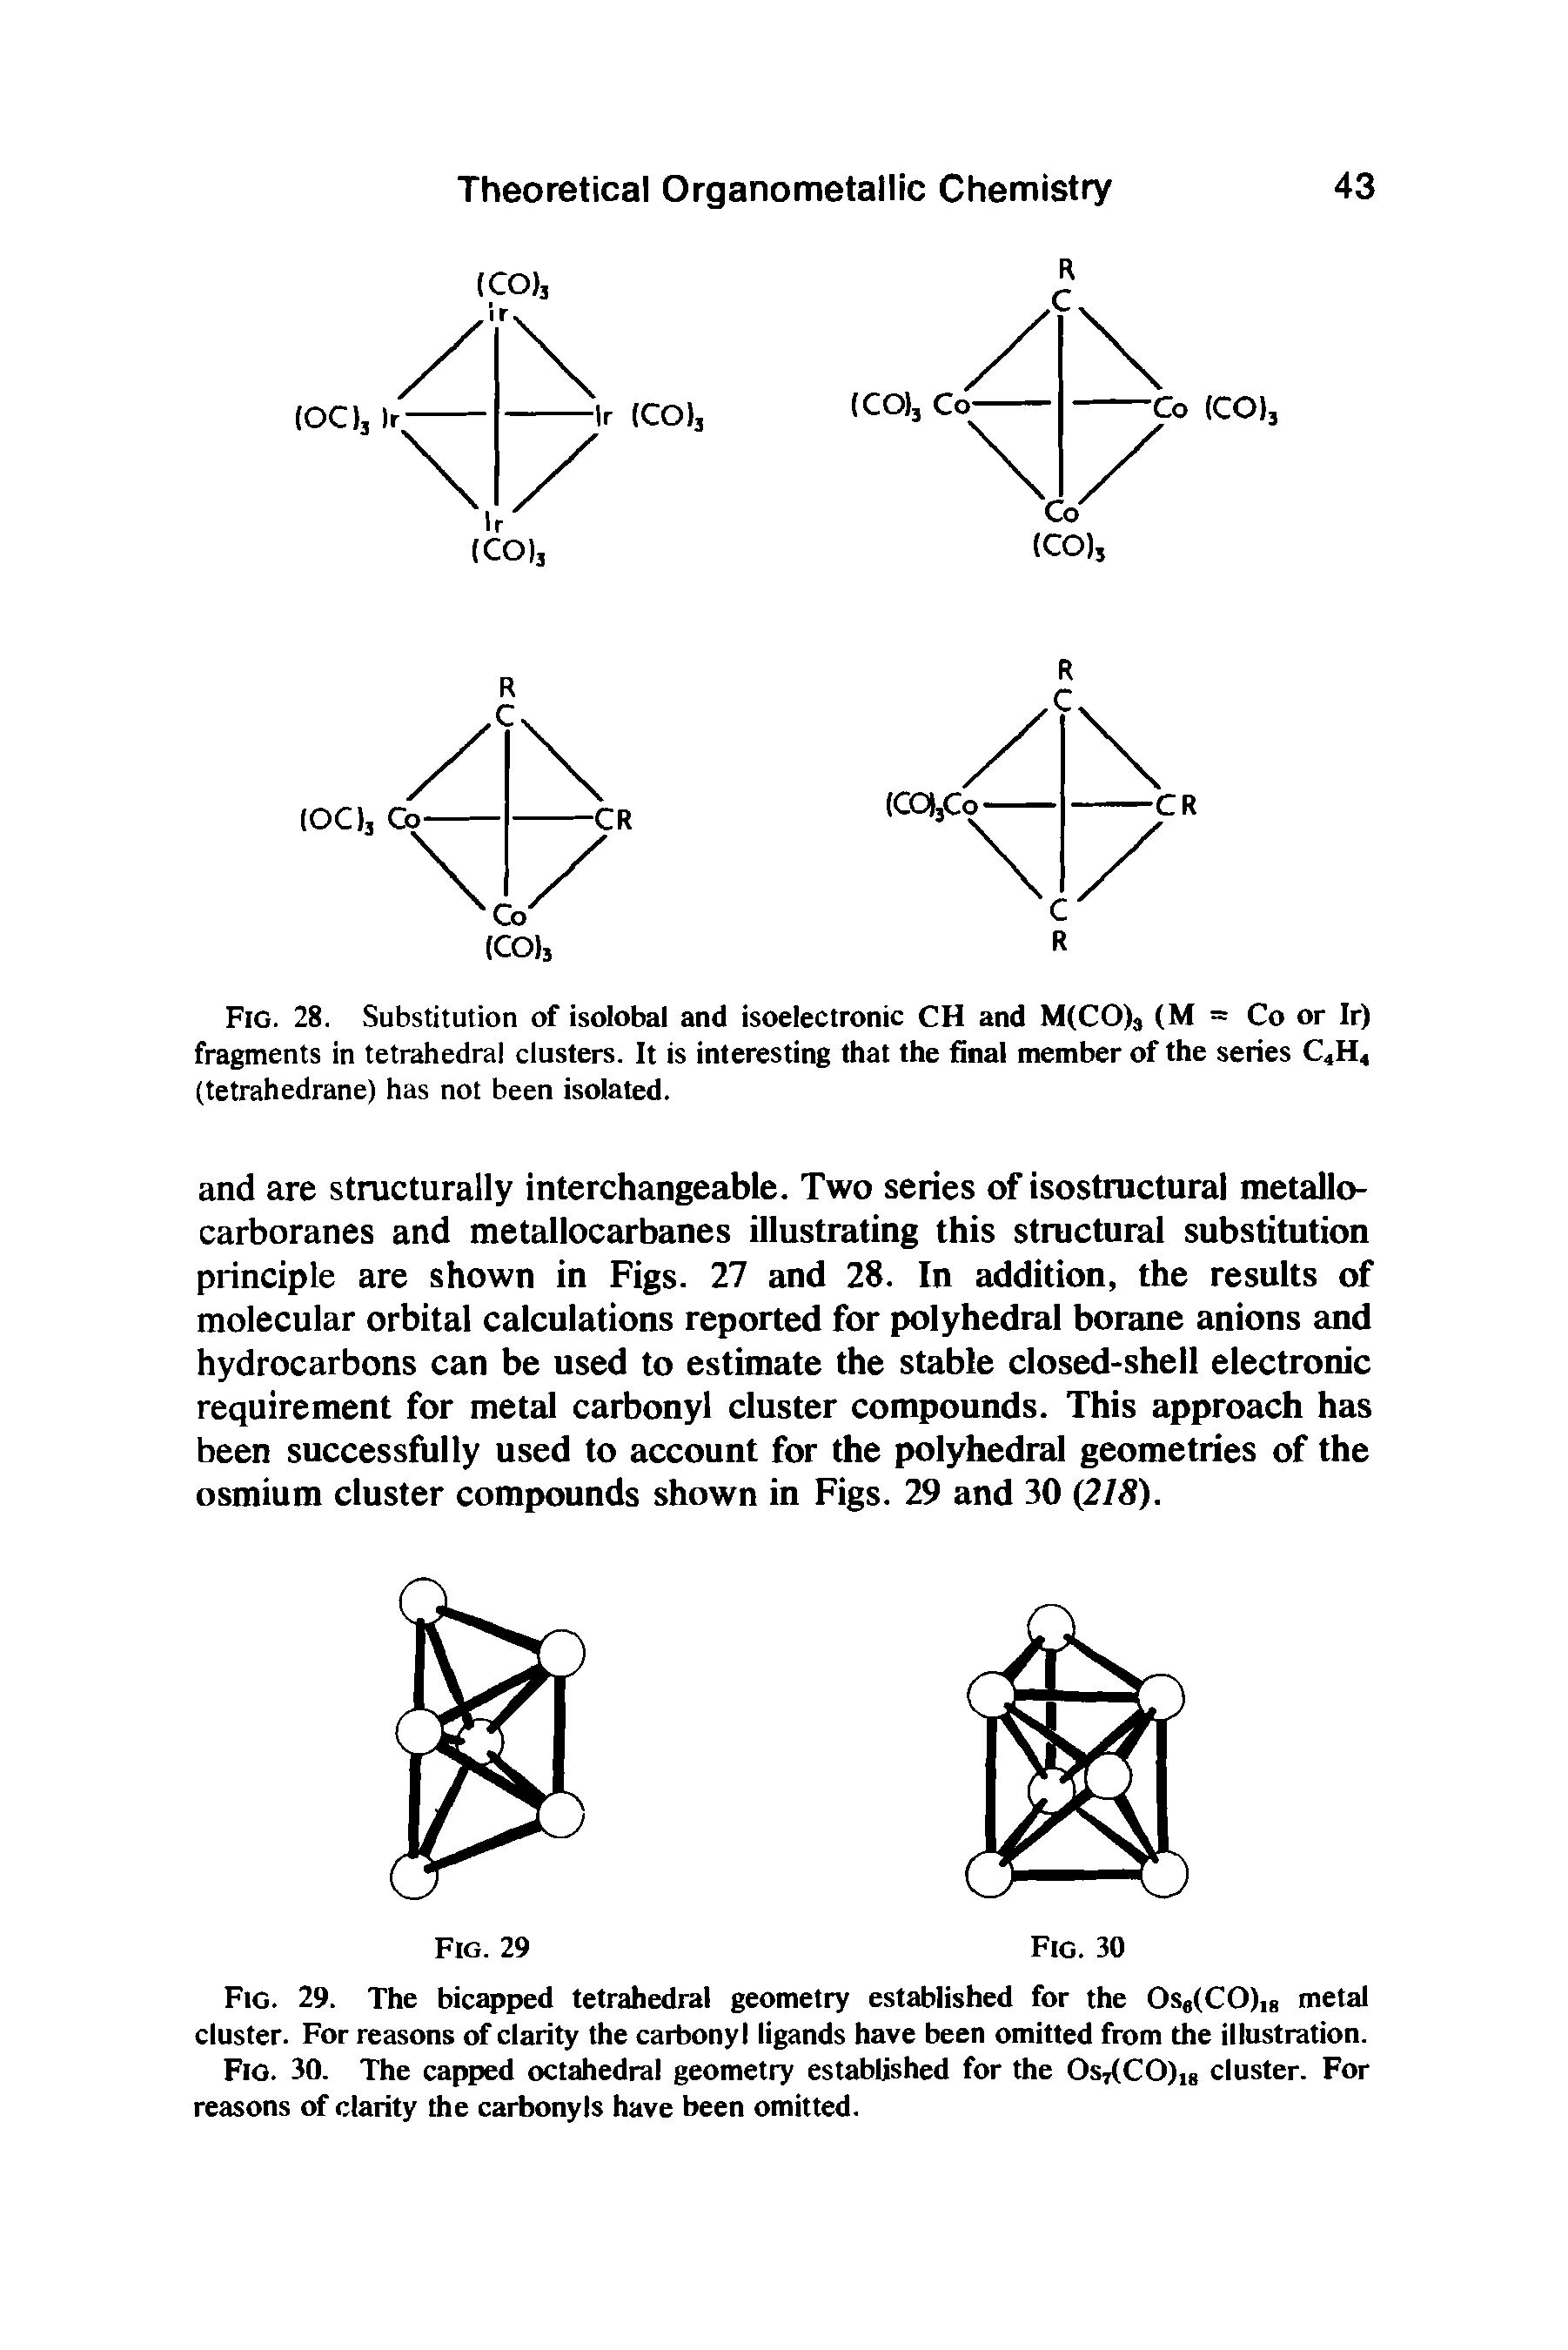 Fig. 28. Substitution of isolobal and isoelectronic CH and M(CO)3 (M = Co or Ir) fragments in tetrahedral clusters. It is interesting that the final member of the series C4H4 (tetrahedrane) has not been isolated.